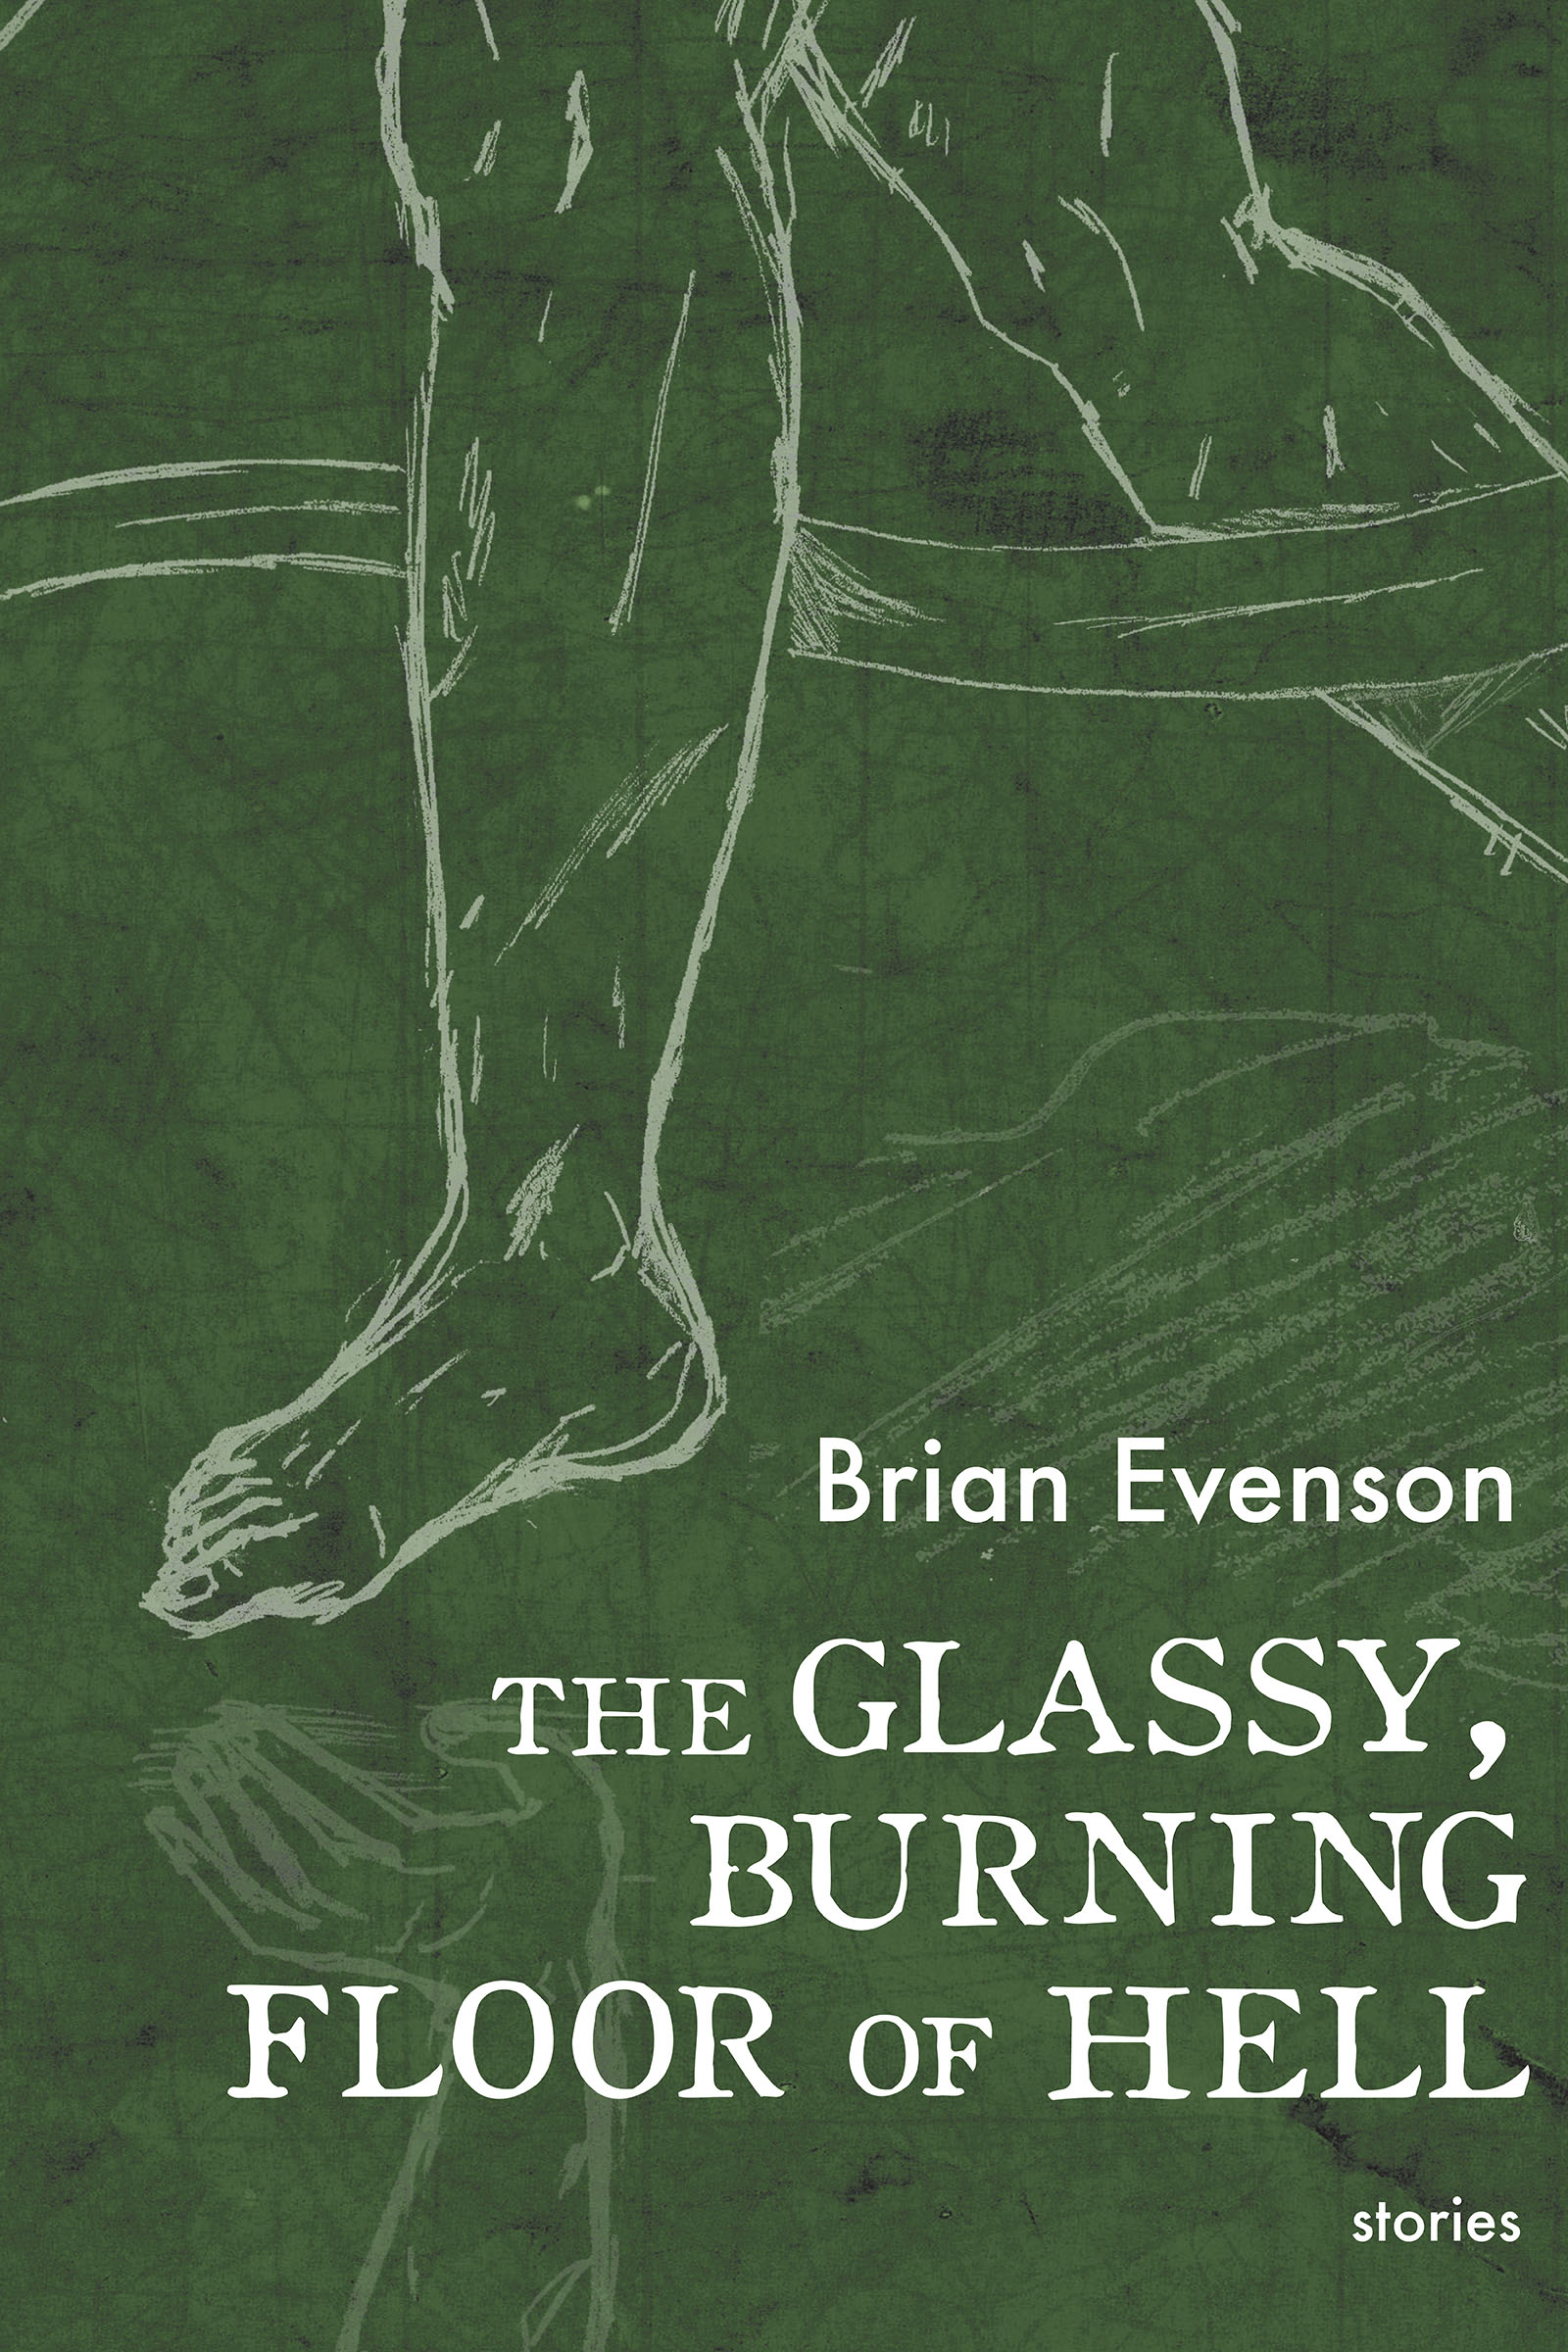 Slant to Reality | An Interview with Brian Evenson